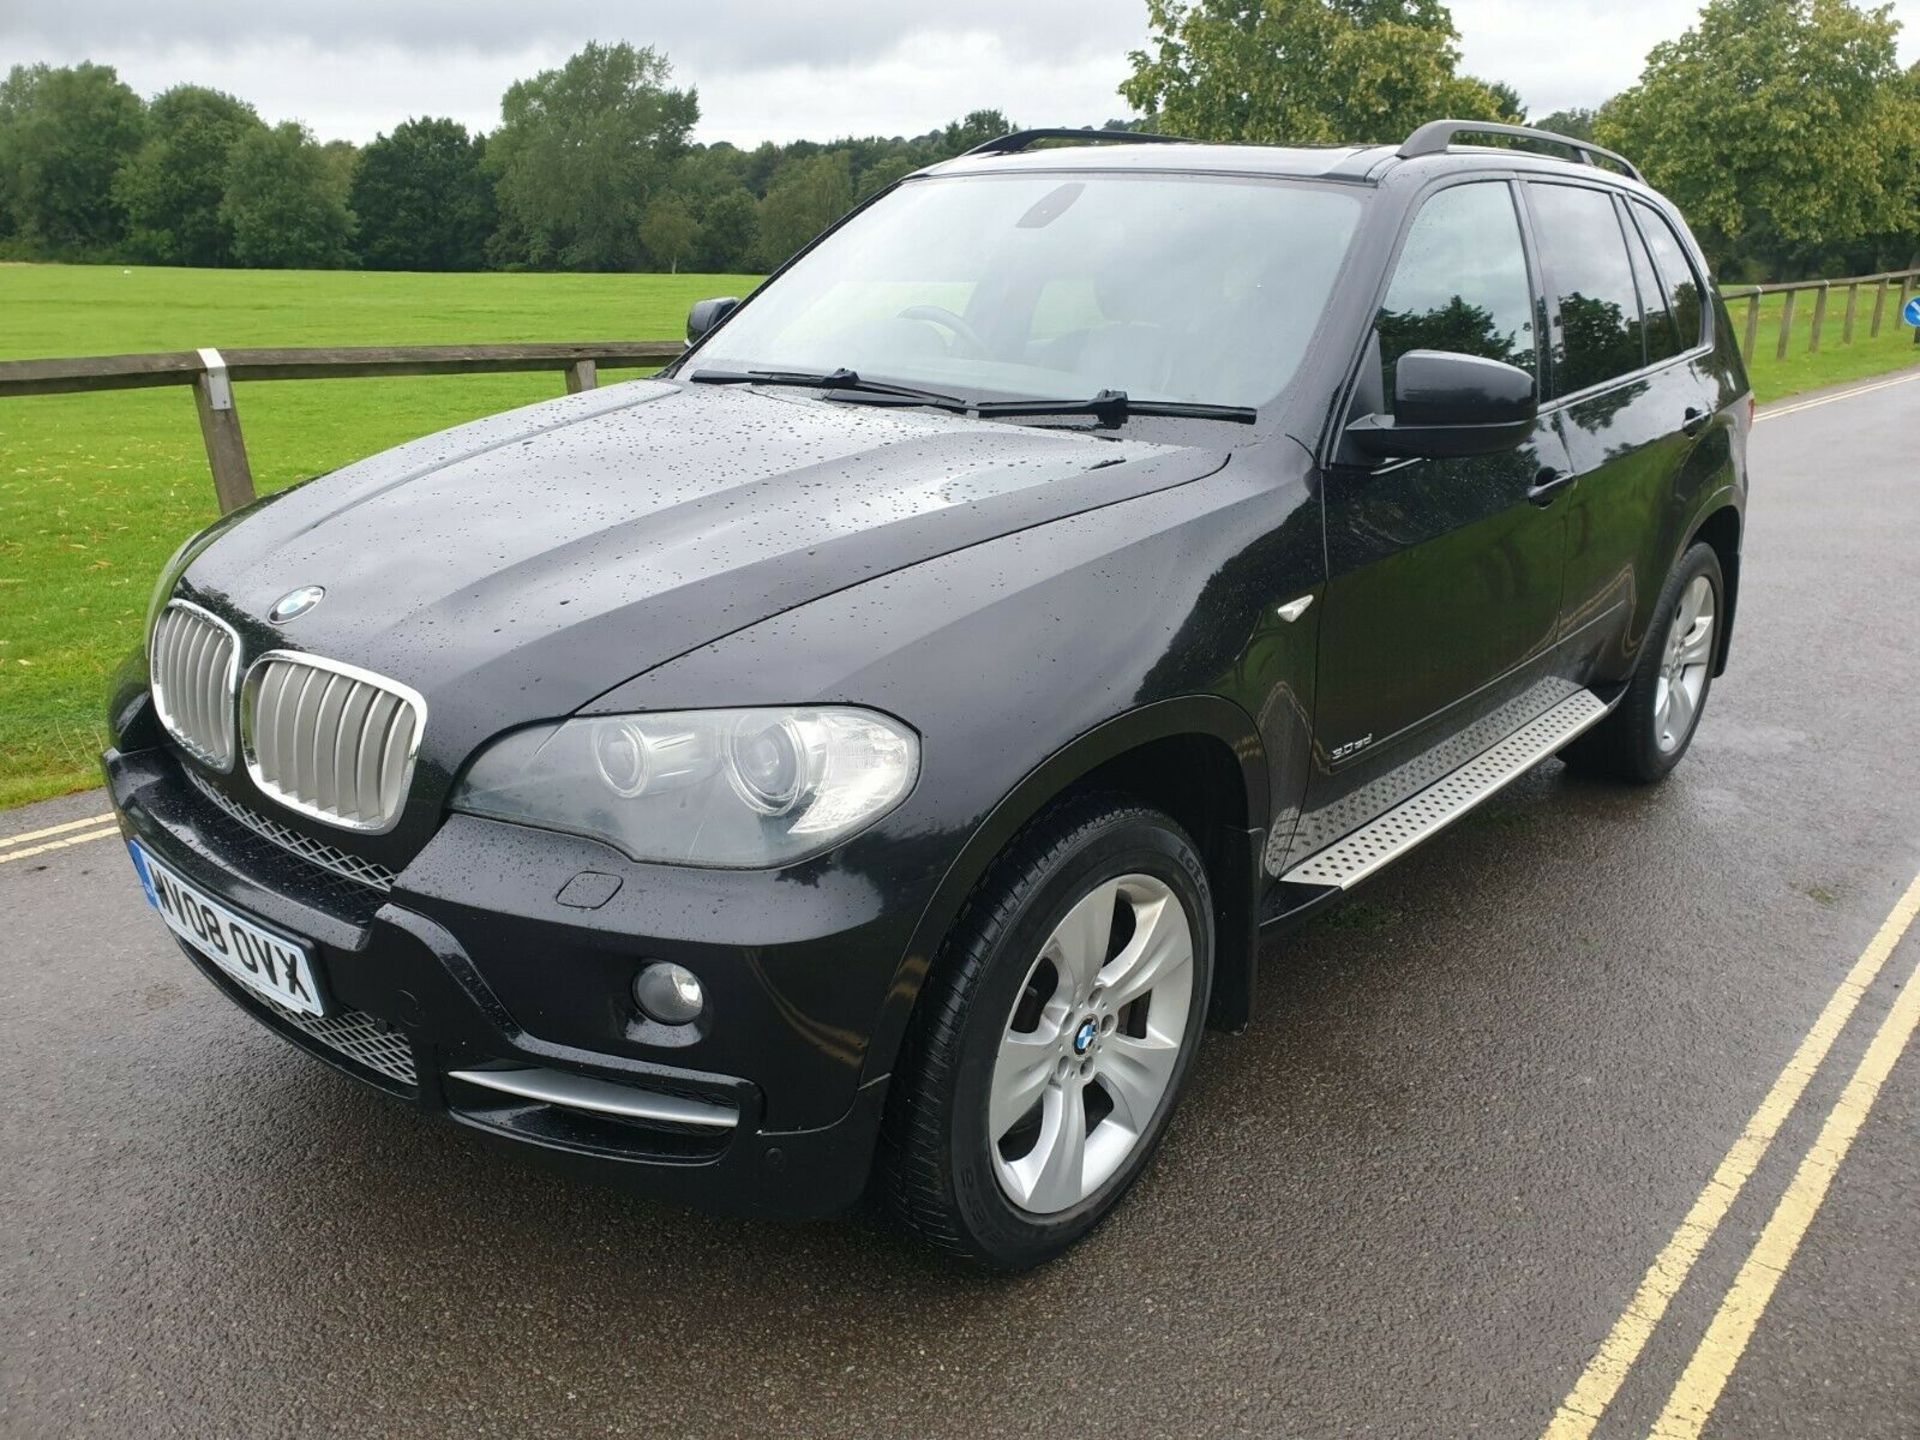 2008 NEW SHAPE BMW X5 3.0SD SE 5S AUTOMATIC BLACK DIESEL 4X4, SHOWING 3 FORMER KEEPERS *NO VAT* - Image 3 of 12